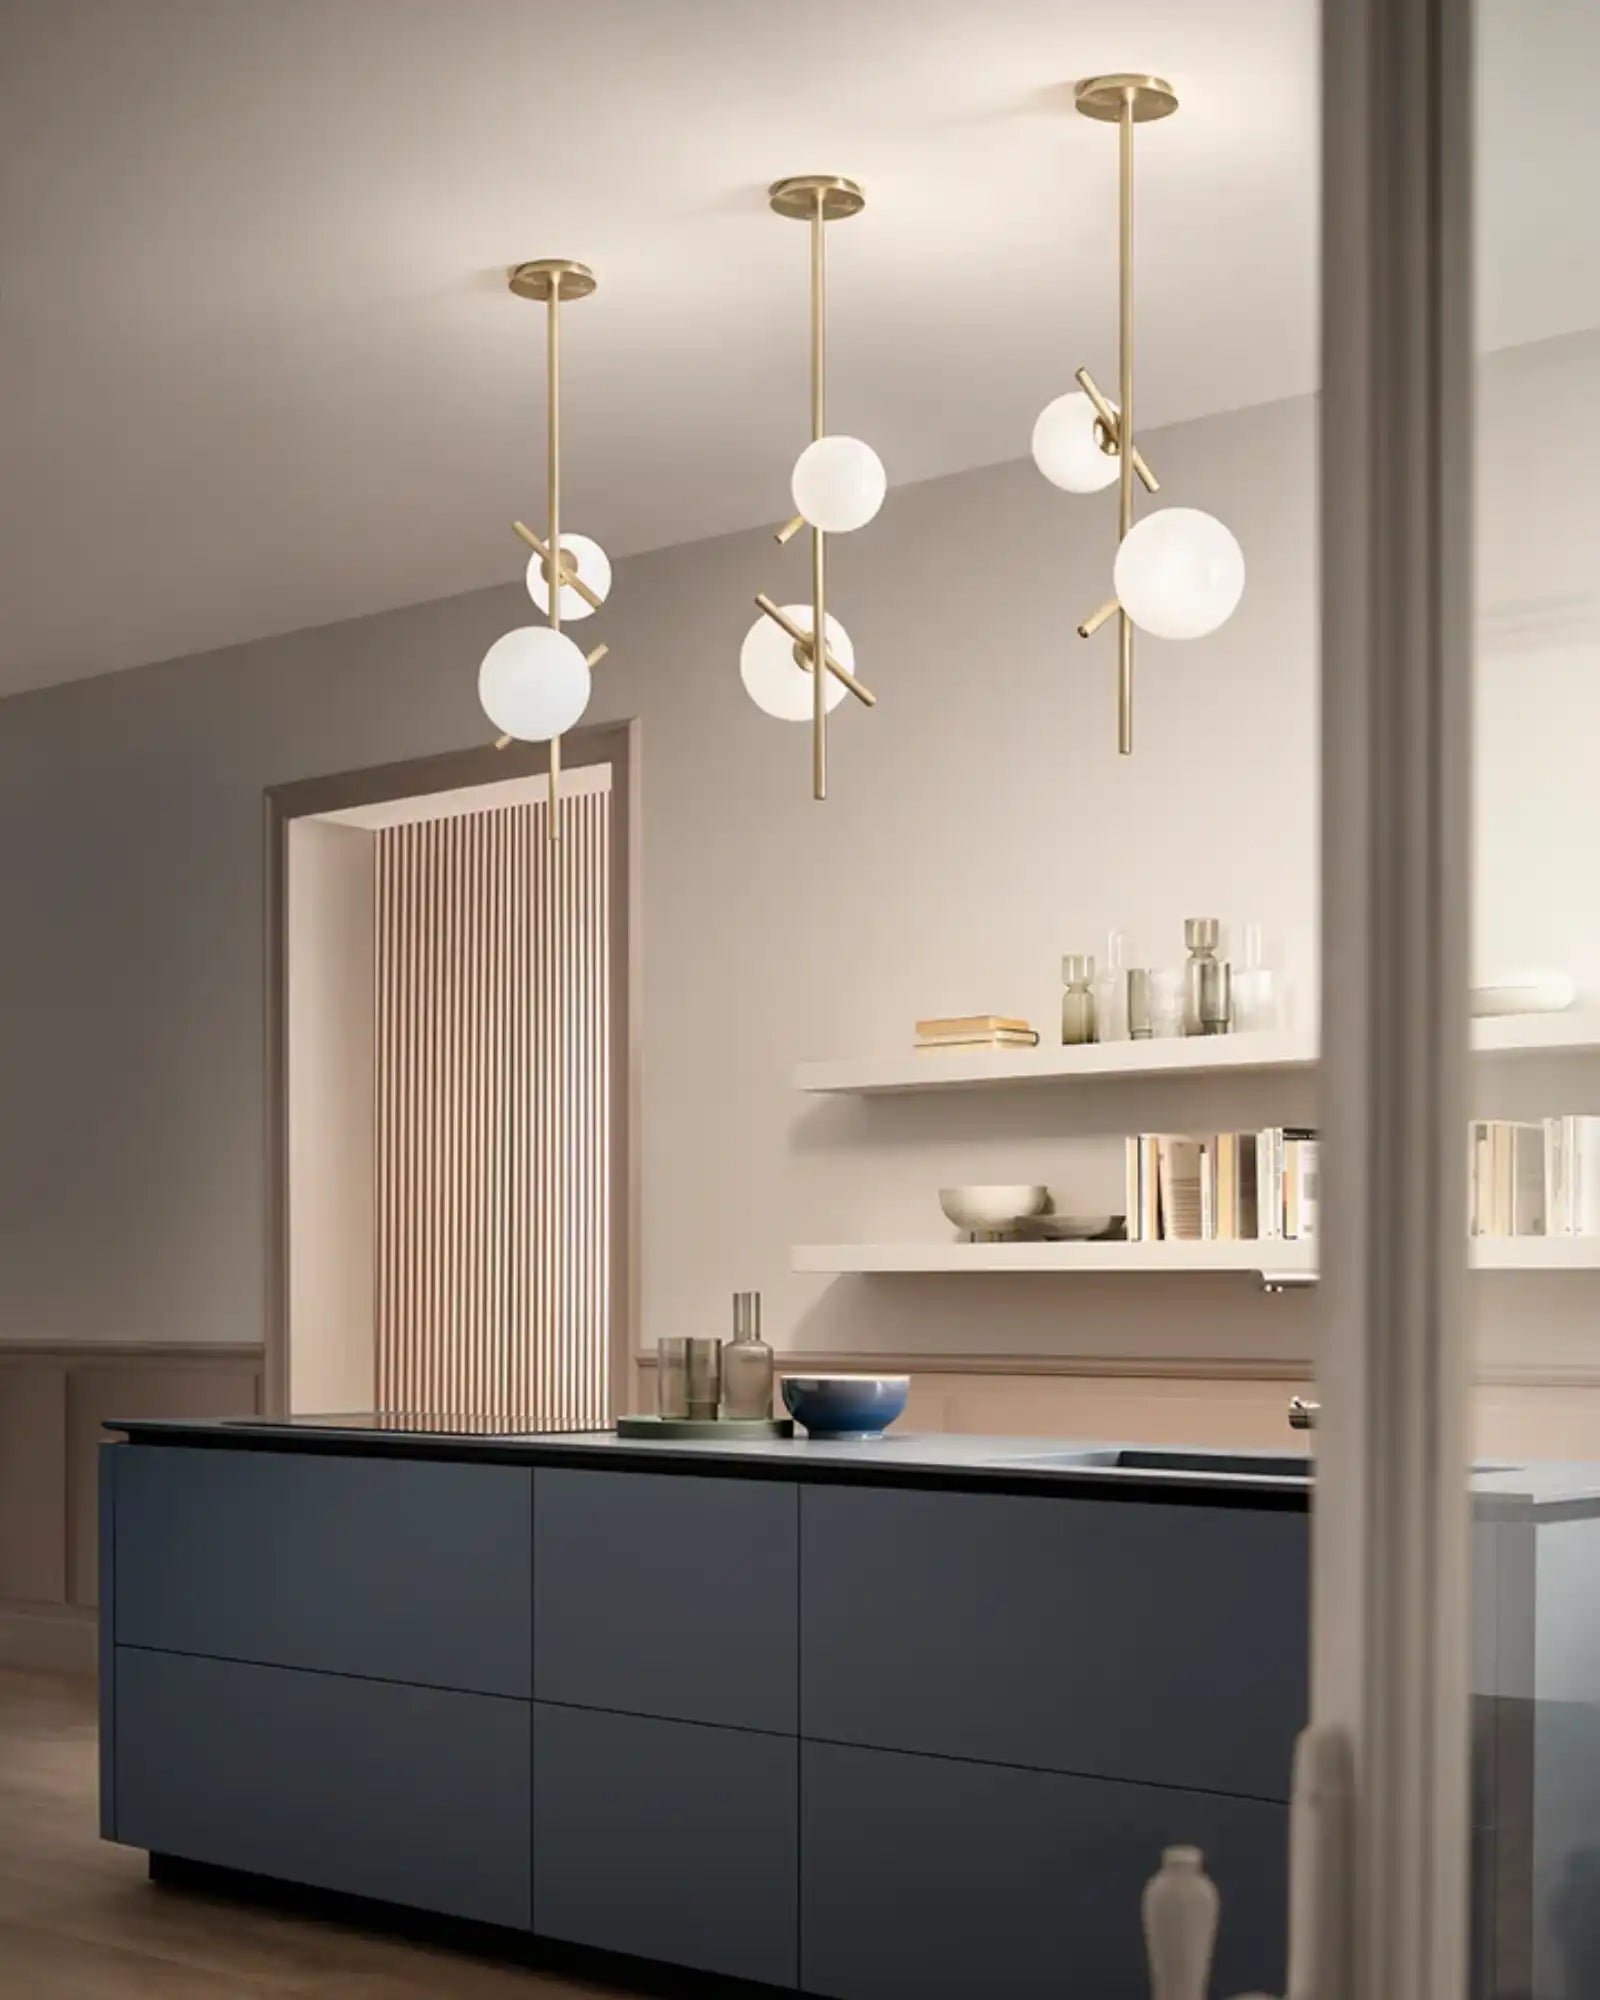 Posy Vertical Pendant Light by Masiero Lighting featured within a contemporary kitchen | Nook Collections